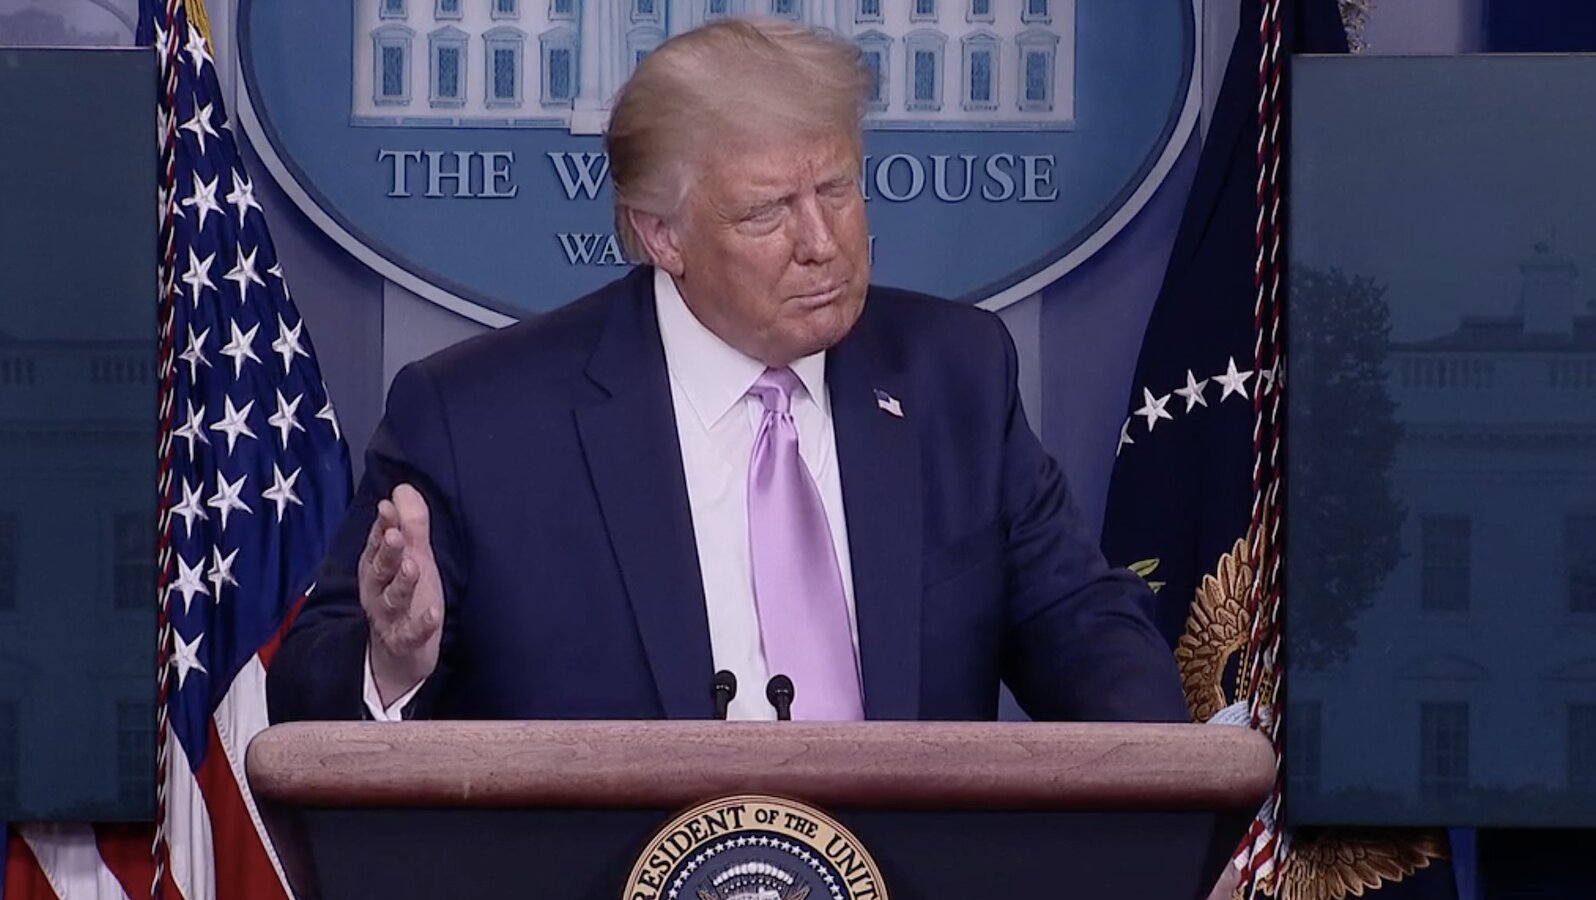 President Trump asked if he’s fighting a “satanic cult of pedophiles and cannibals” as White House press conference